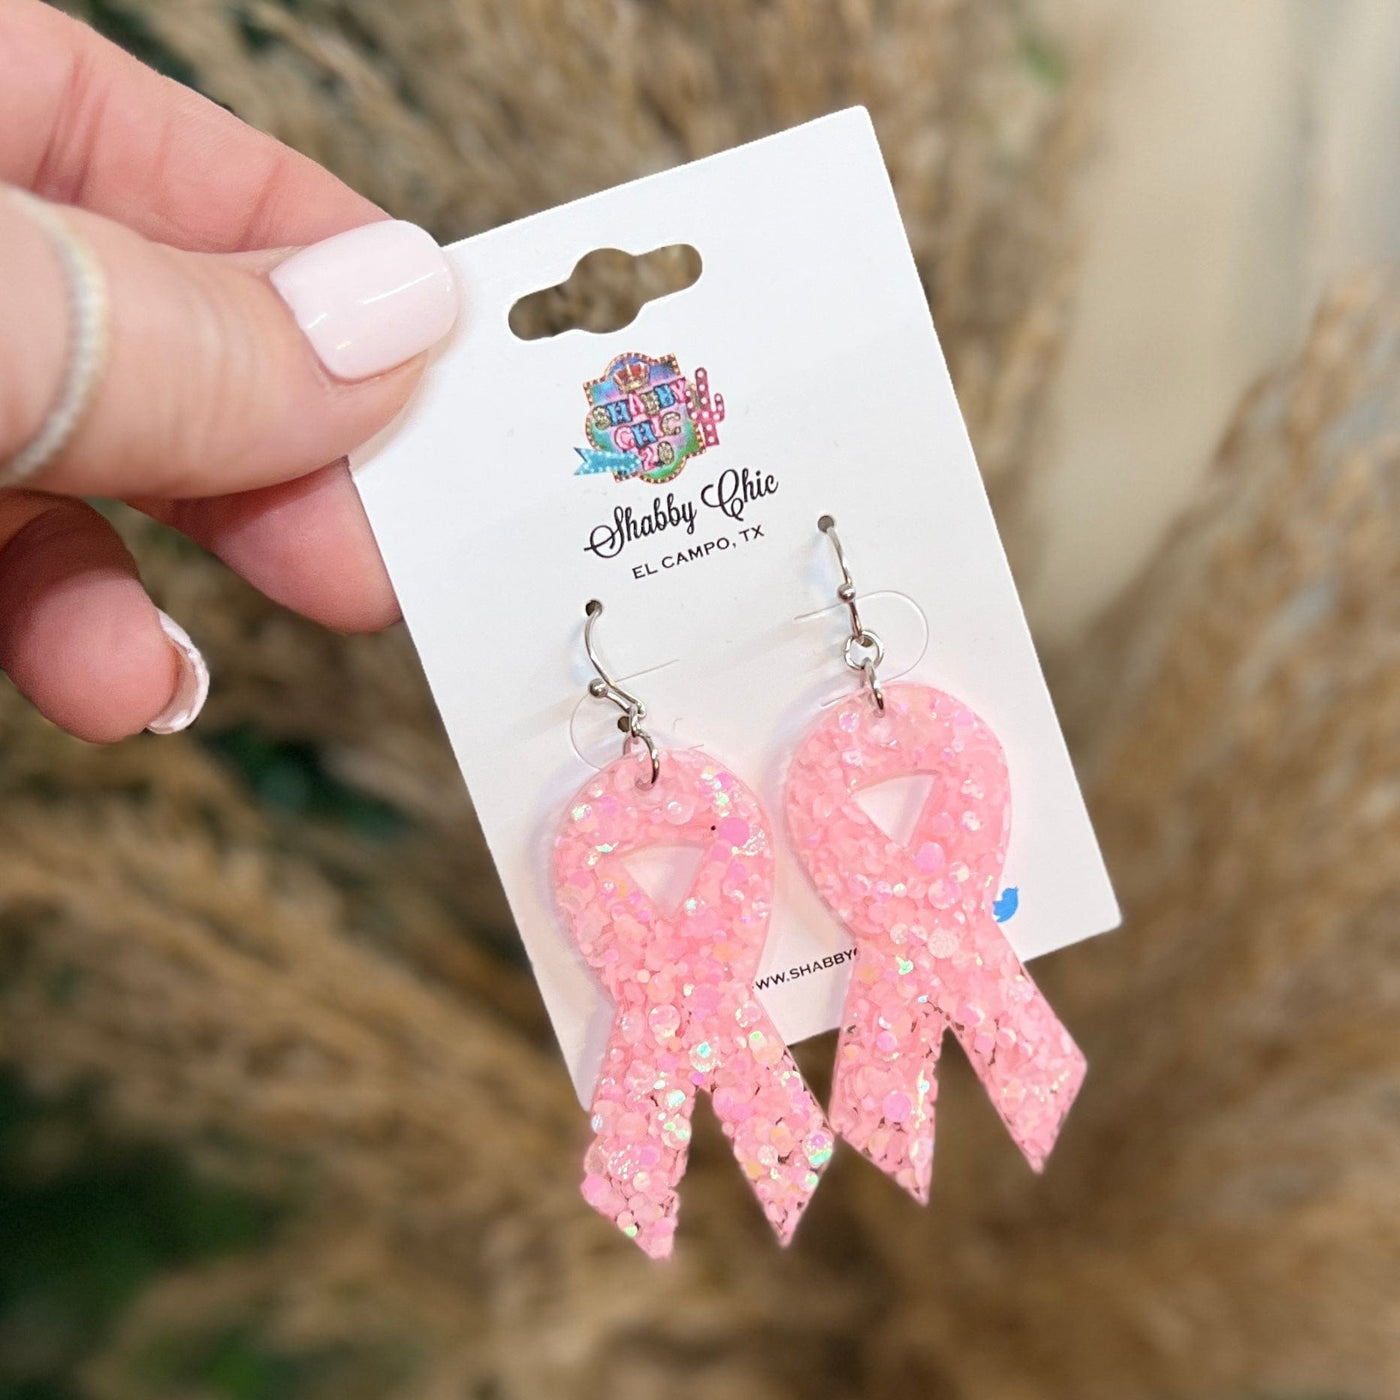 Breast Cancer Awareness Earrings Shabby Chic Boutique and Tanning Salon Light Pink Ribbon